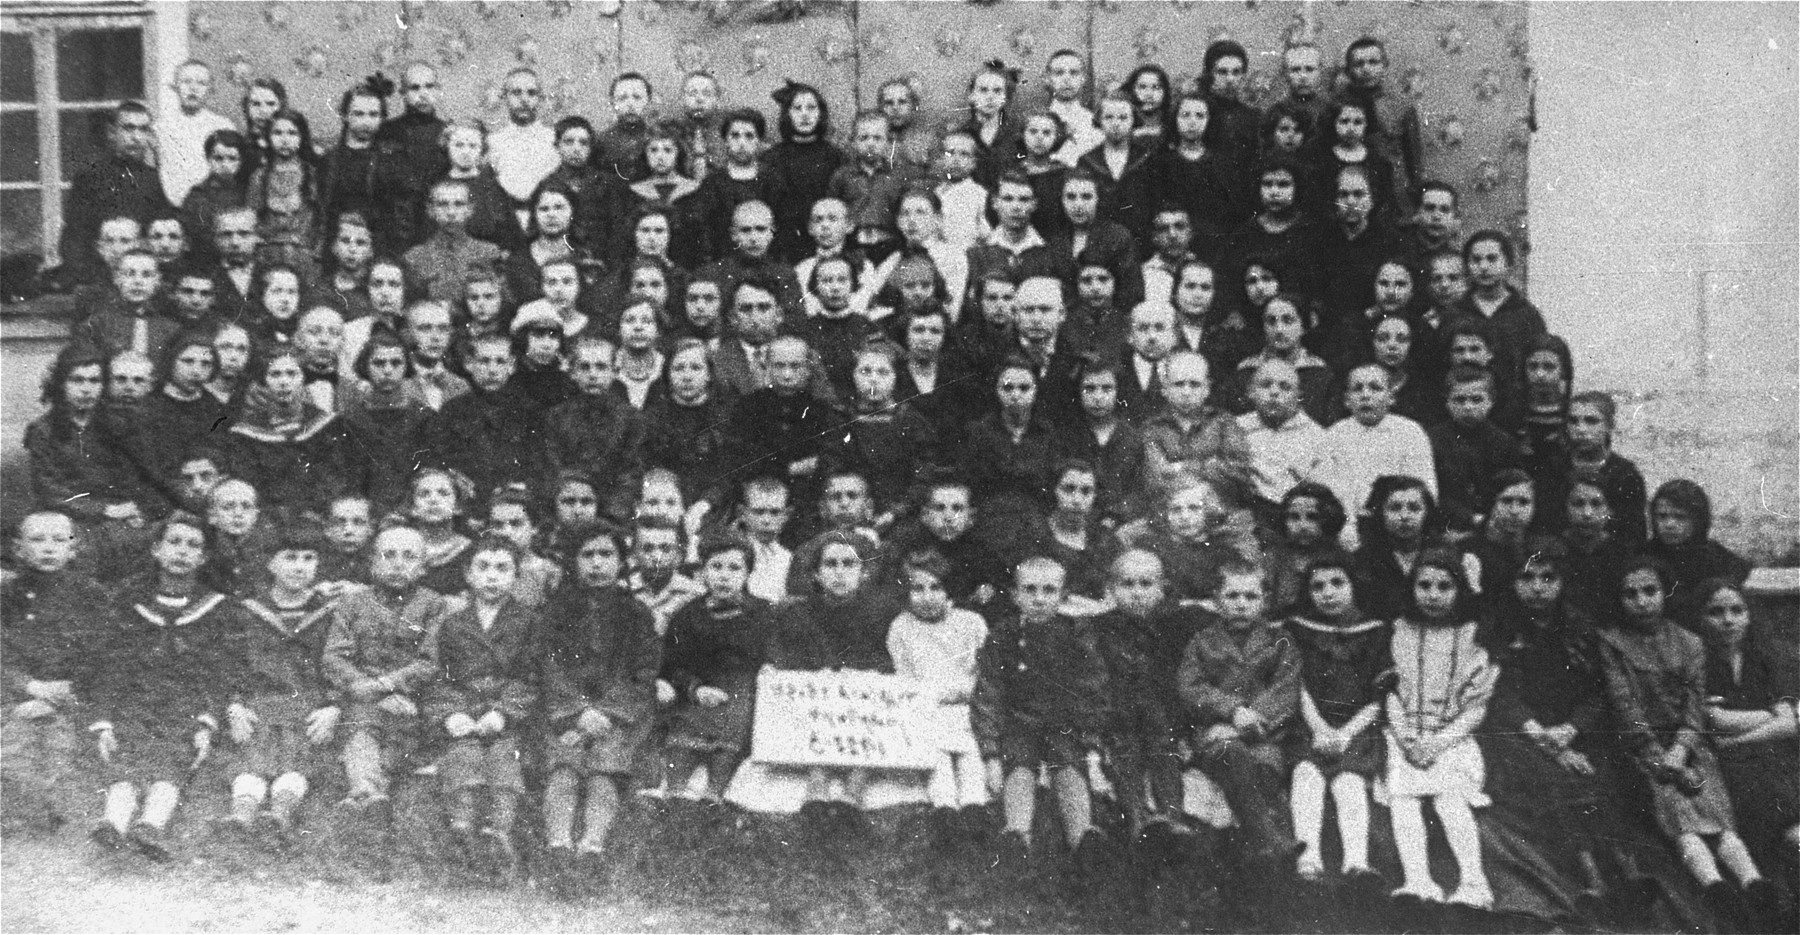 Photograph of a class in a school in Swienciany, Poland in 1928.